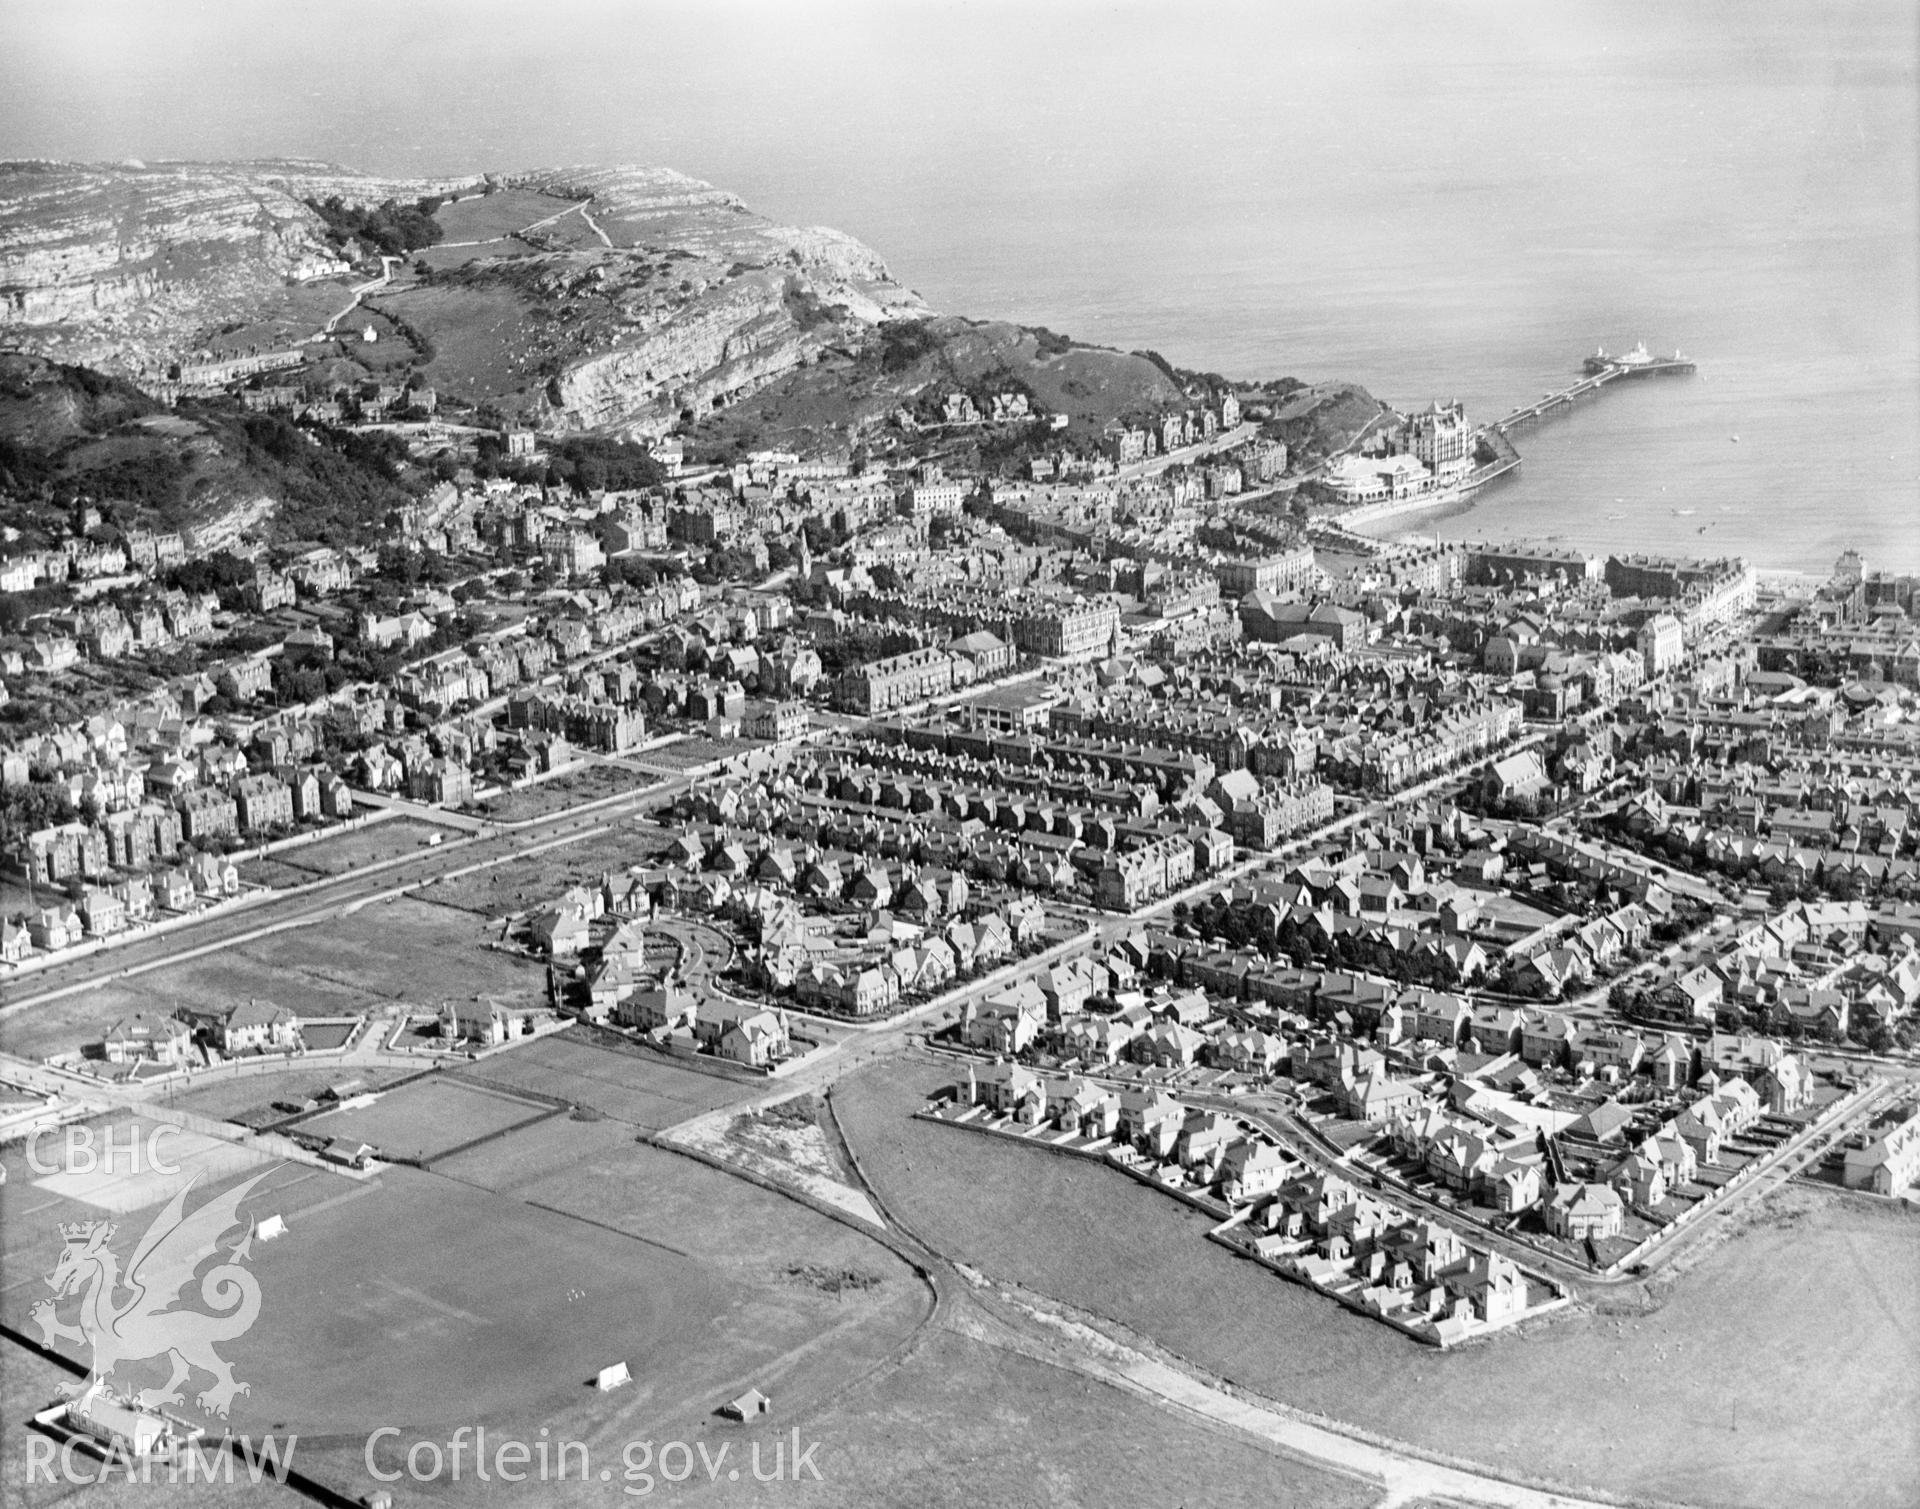 General view of Llandudno, showing cricket and tennis grounds, oblique aerial view. 5?x4? black and white glass plate negative.